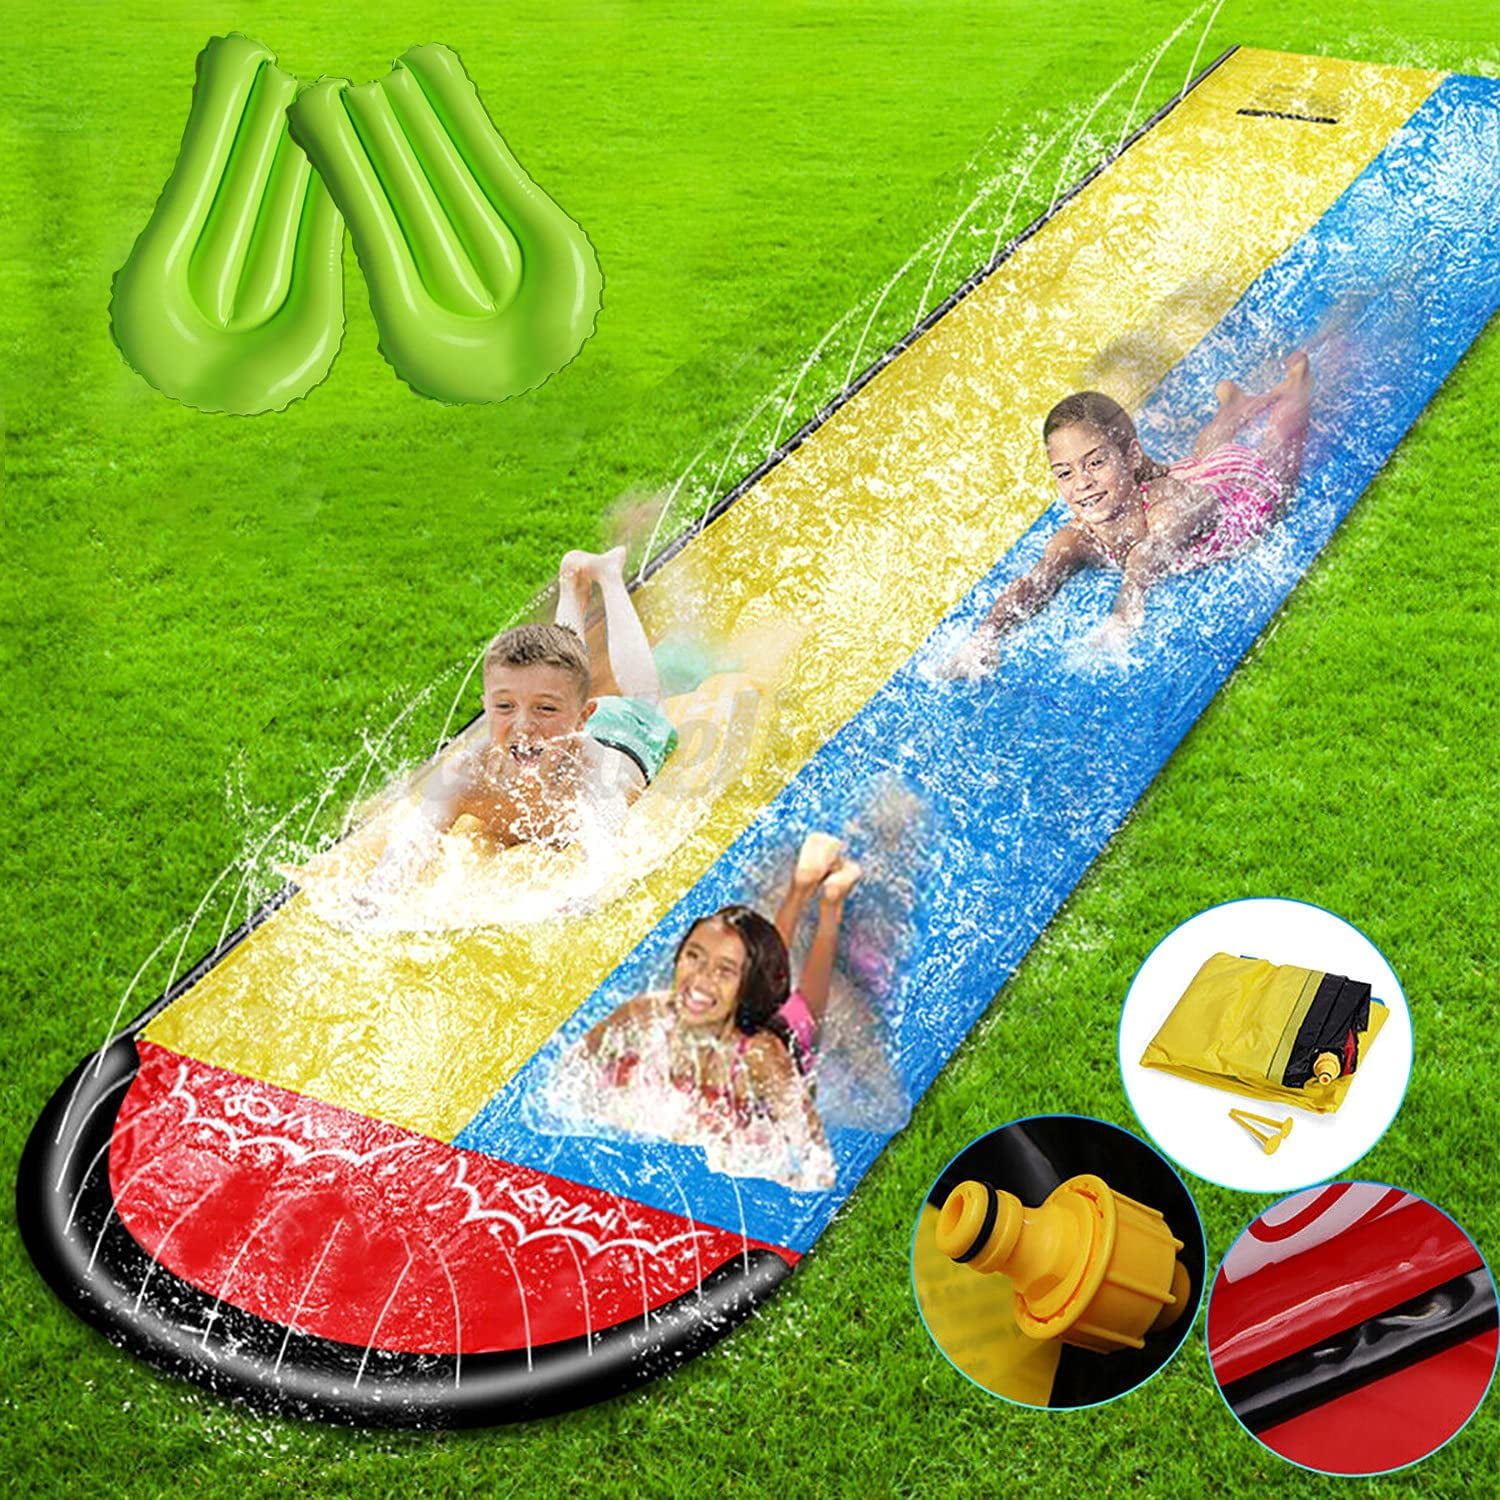 Garden Backyard Giant Racing Lanes and Splash Pool Outdoor 15.7FT Water Slides with Crash Pad Outdoor Water Toys Lawn Water Slides for Kids Adults